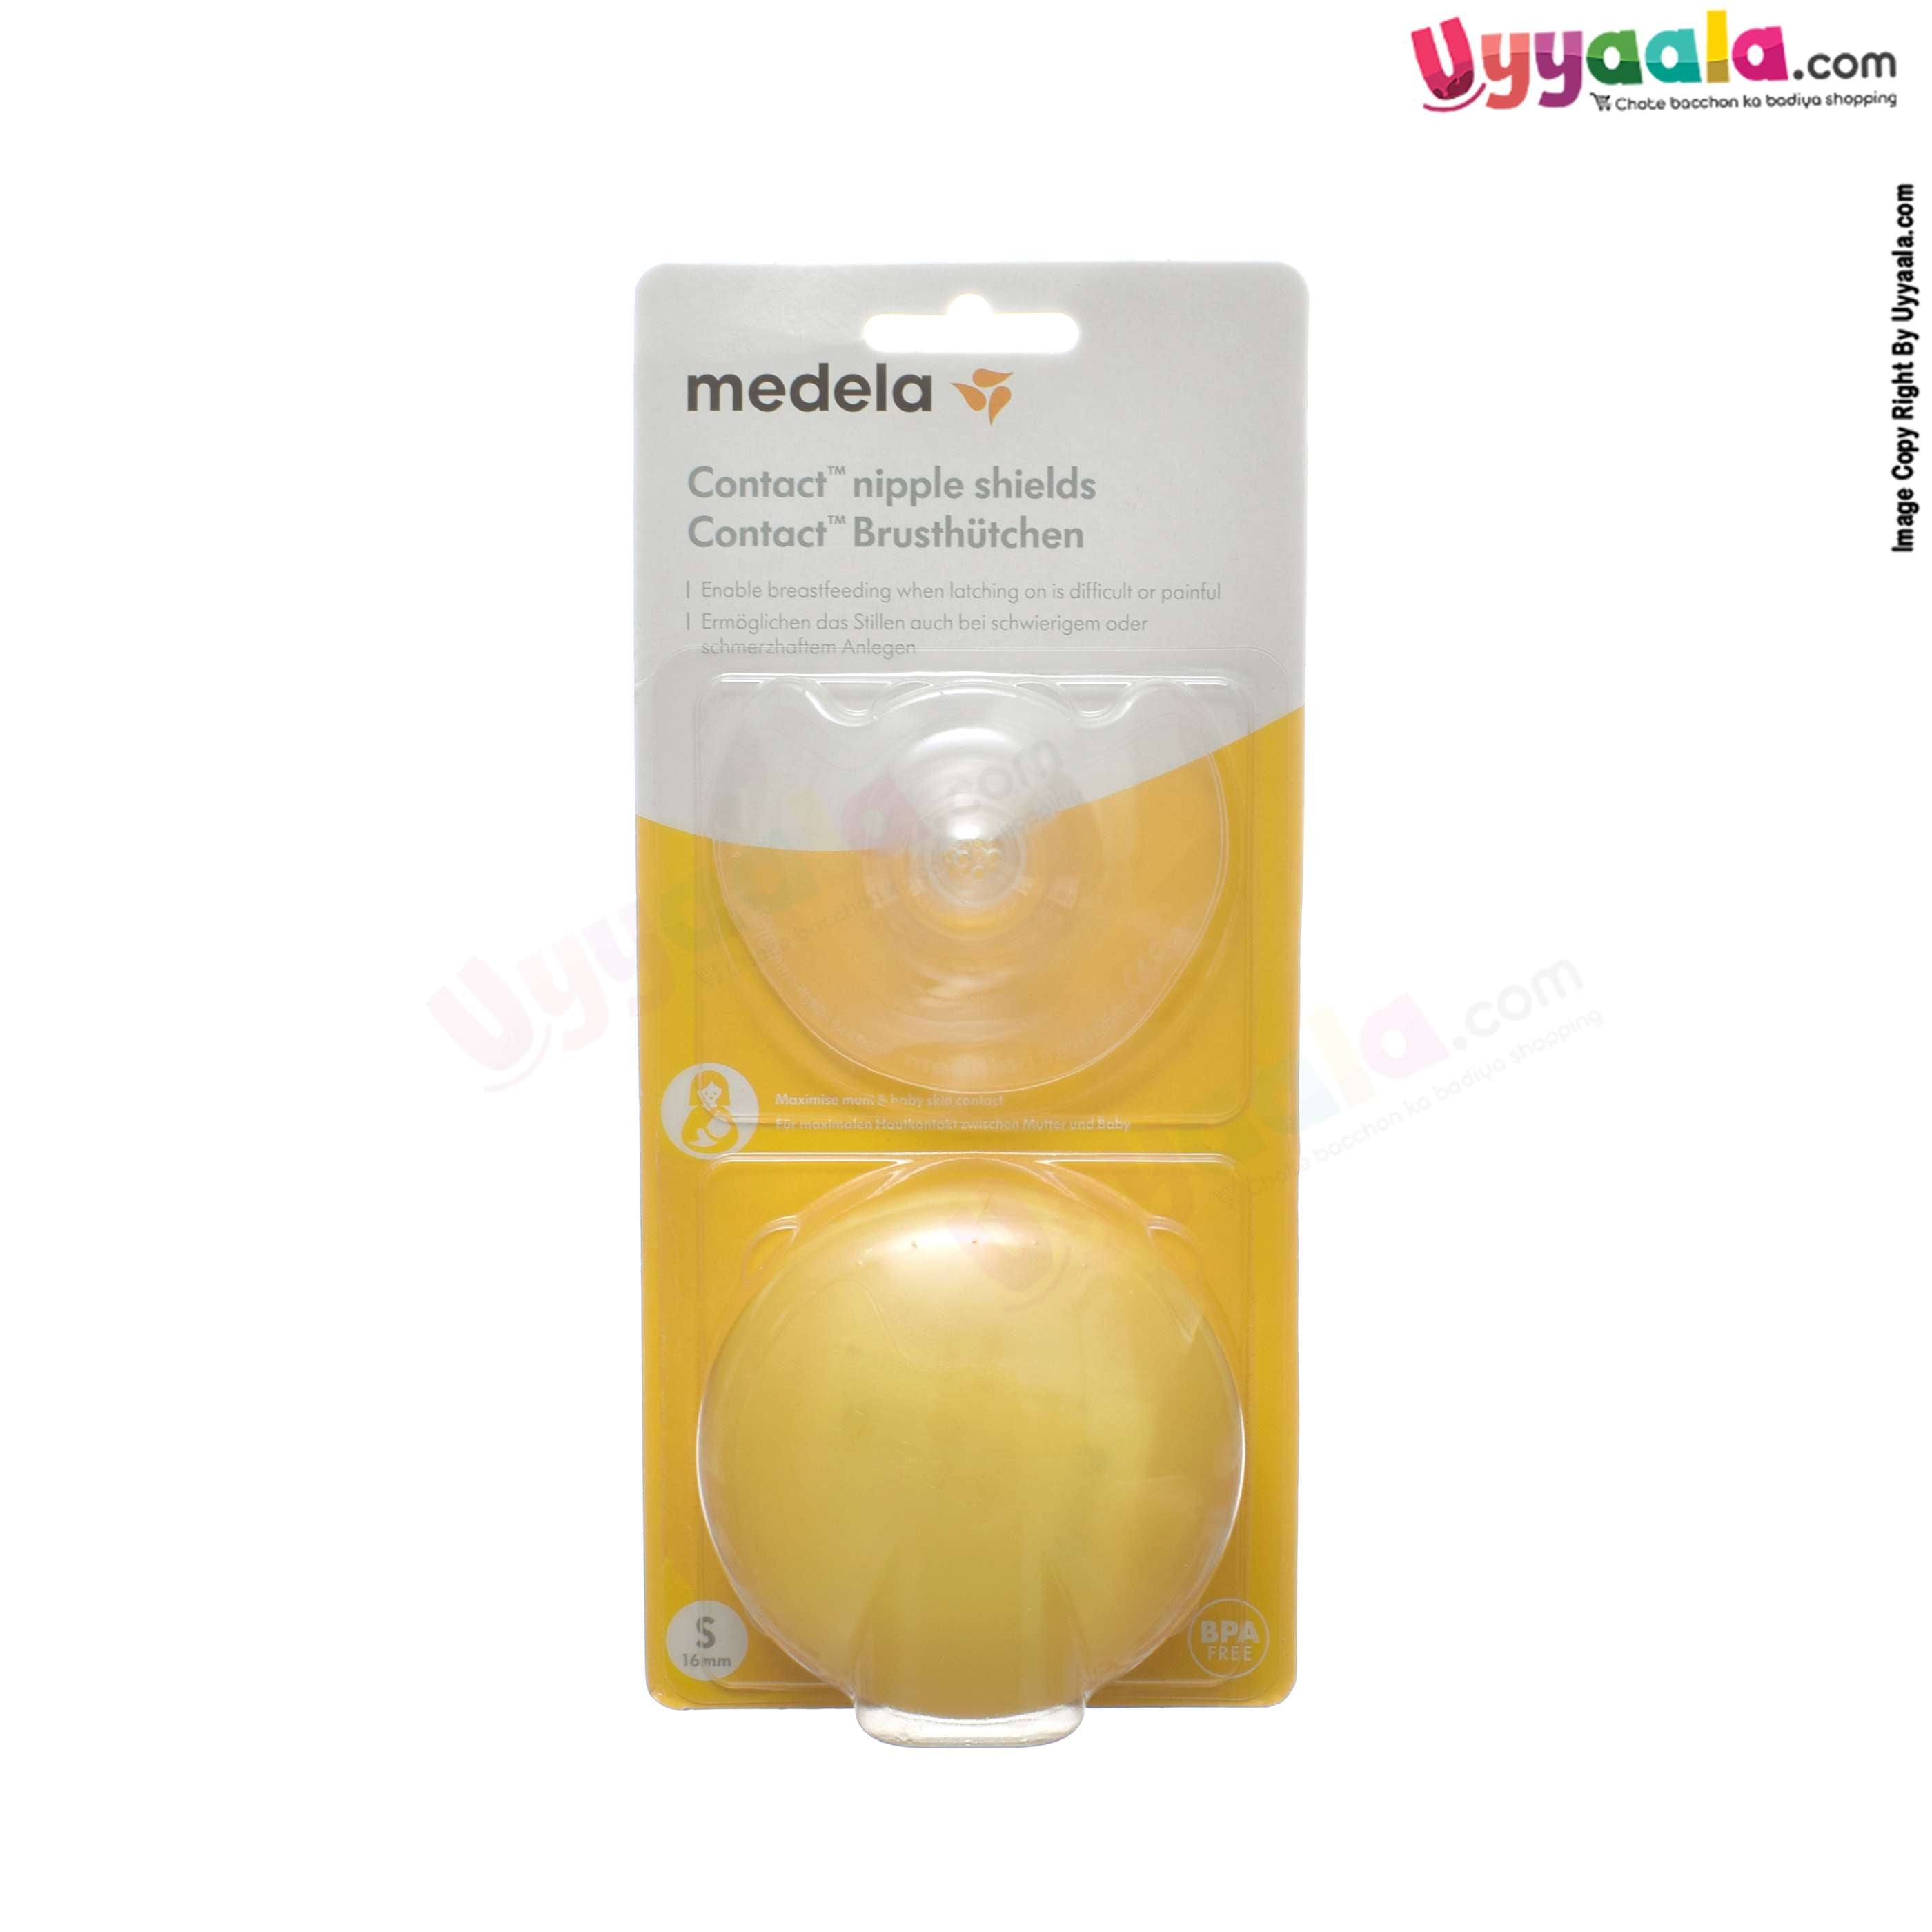 Buy Medela Maternity Products Online in India